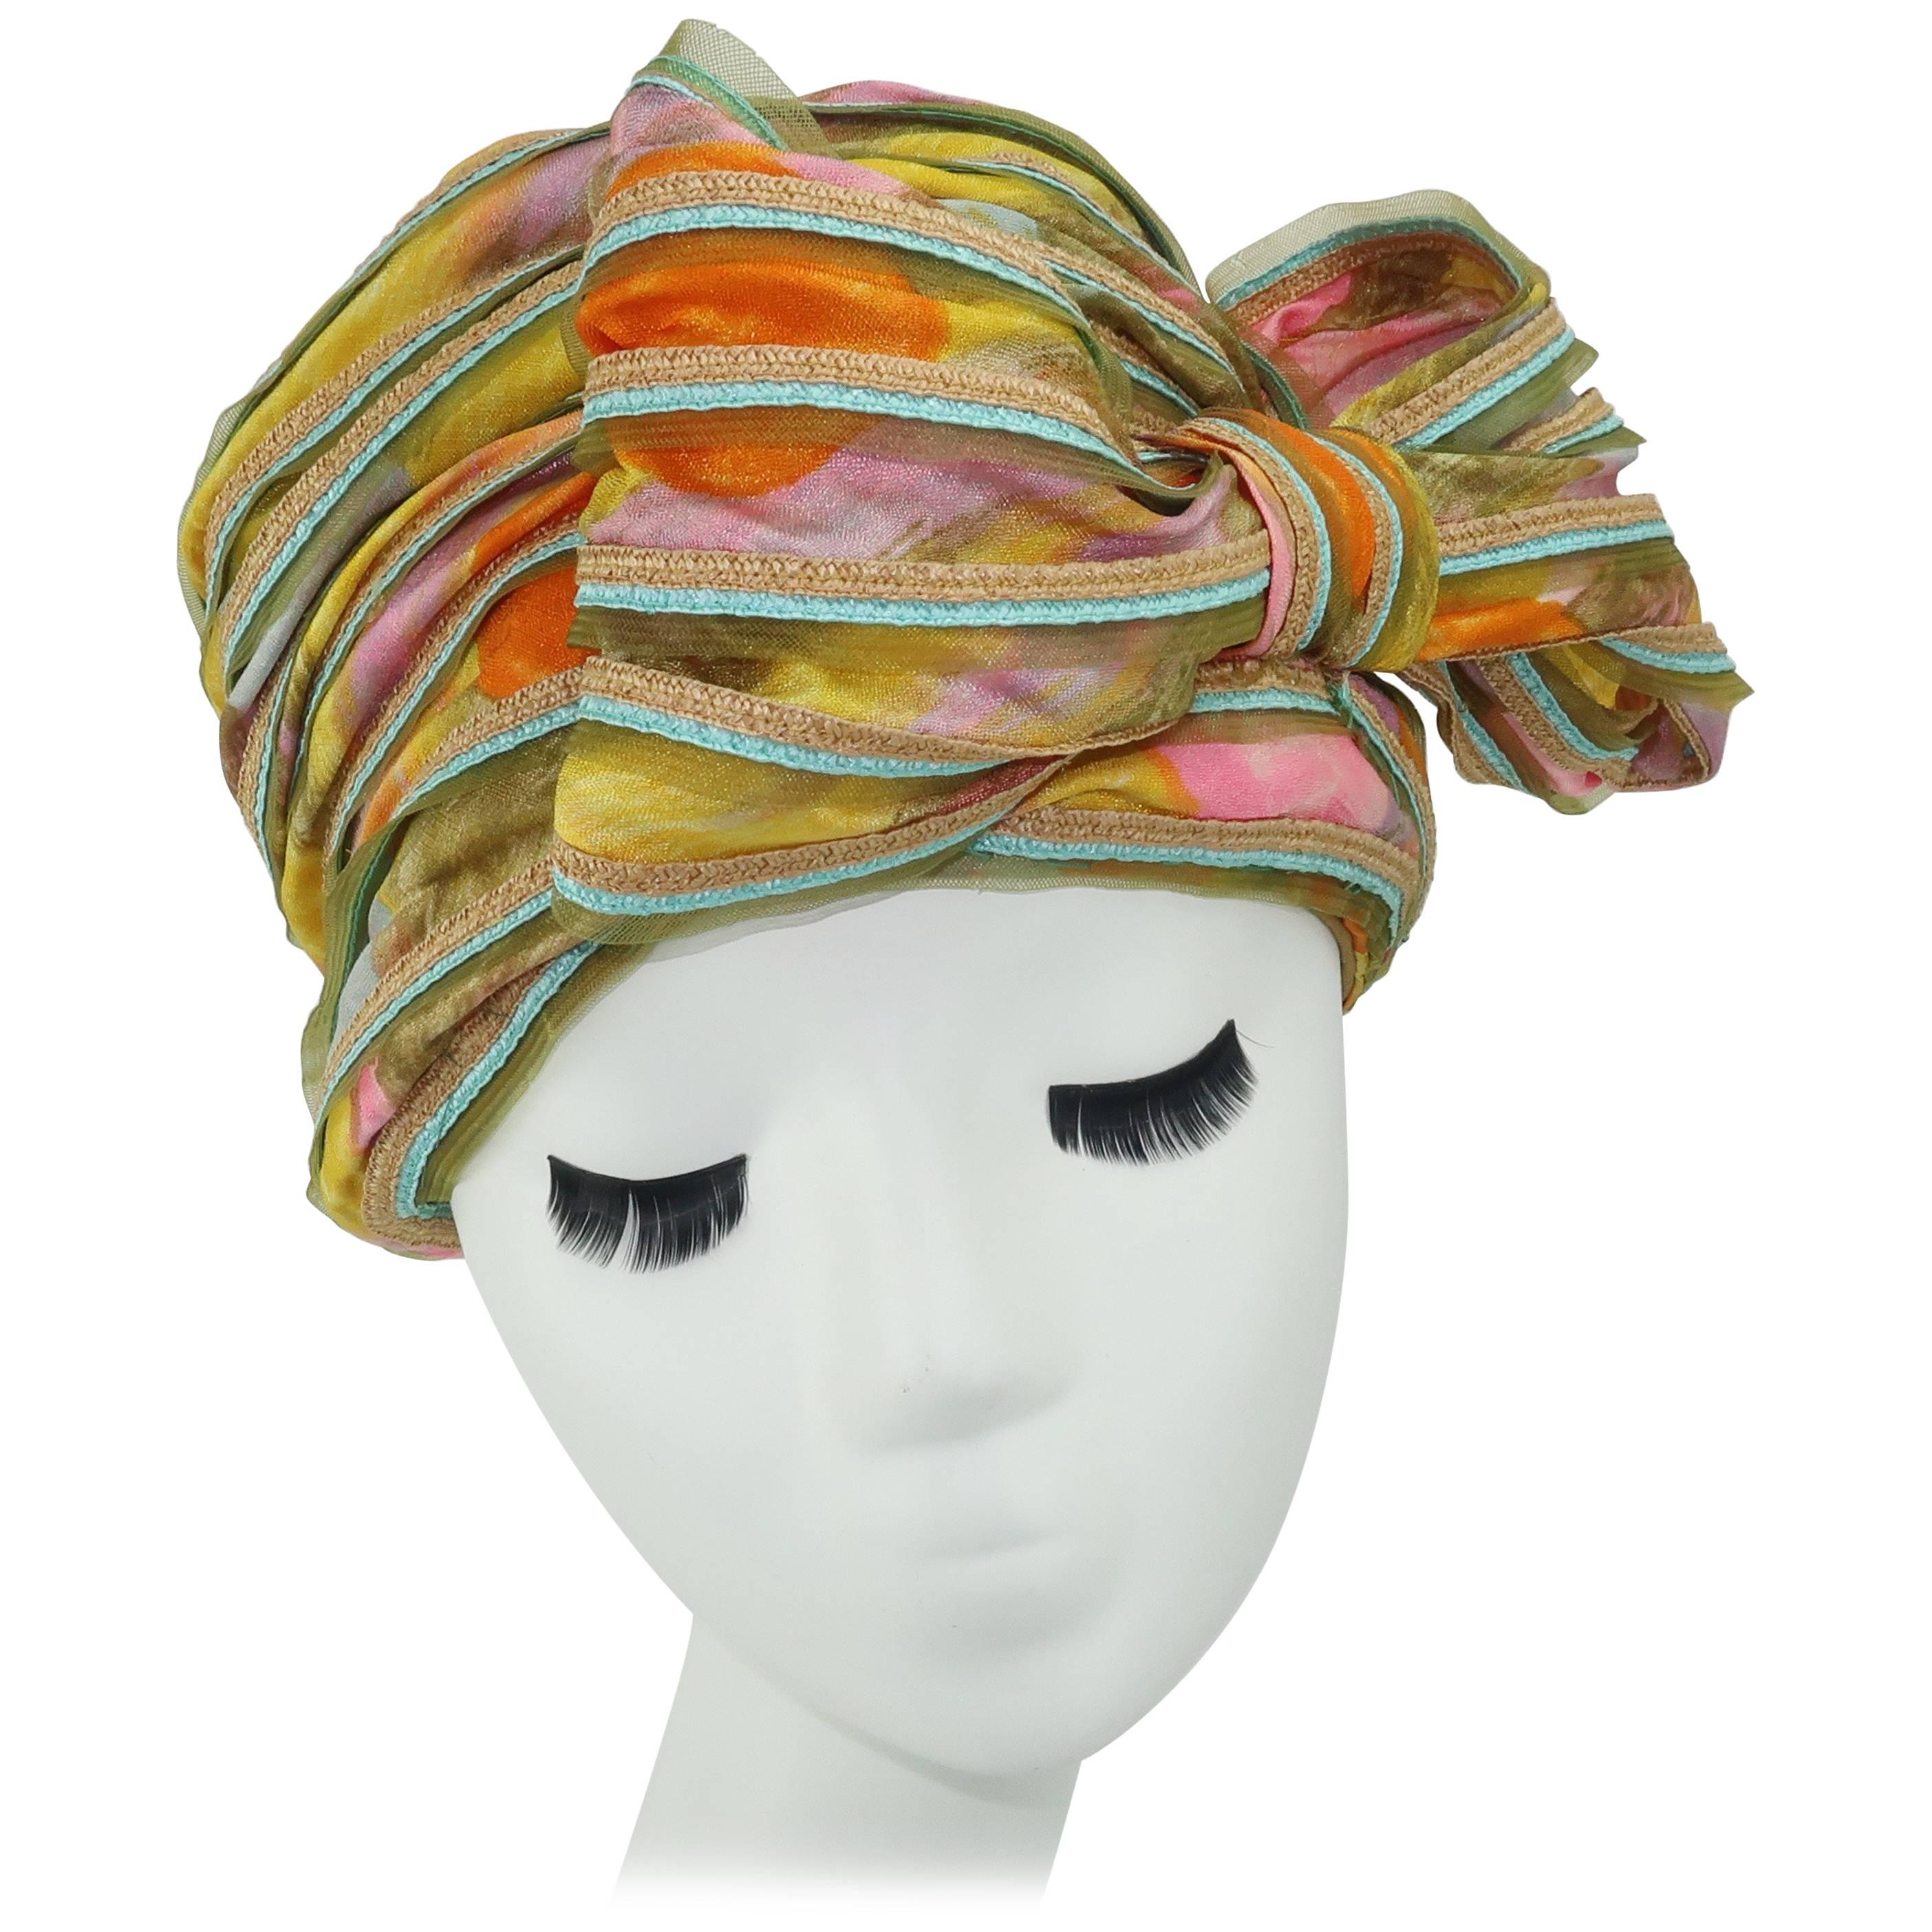 Mr. John Jr. Floral Turban Style Hat With Straw Edging, 1960s 